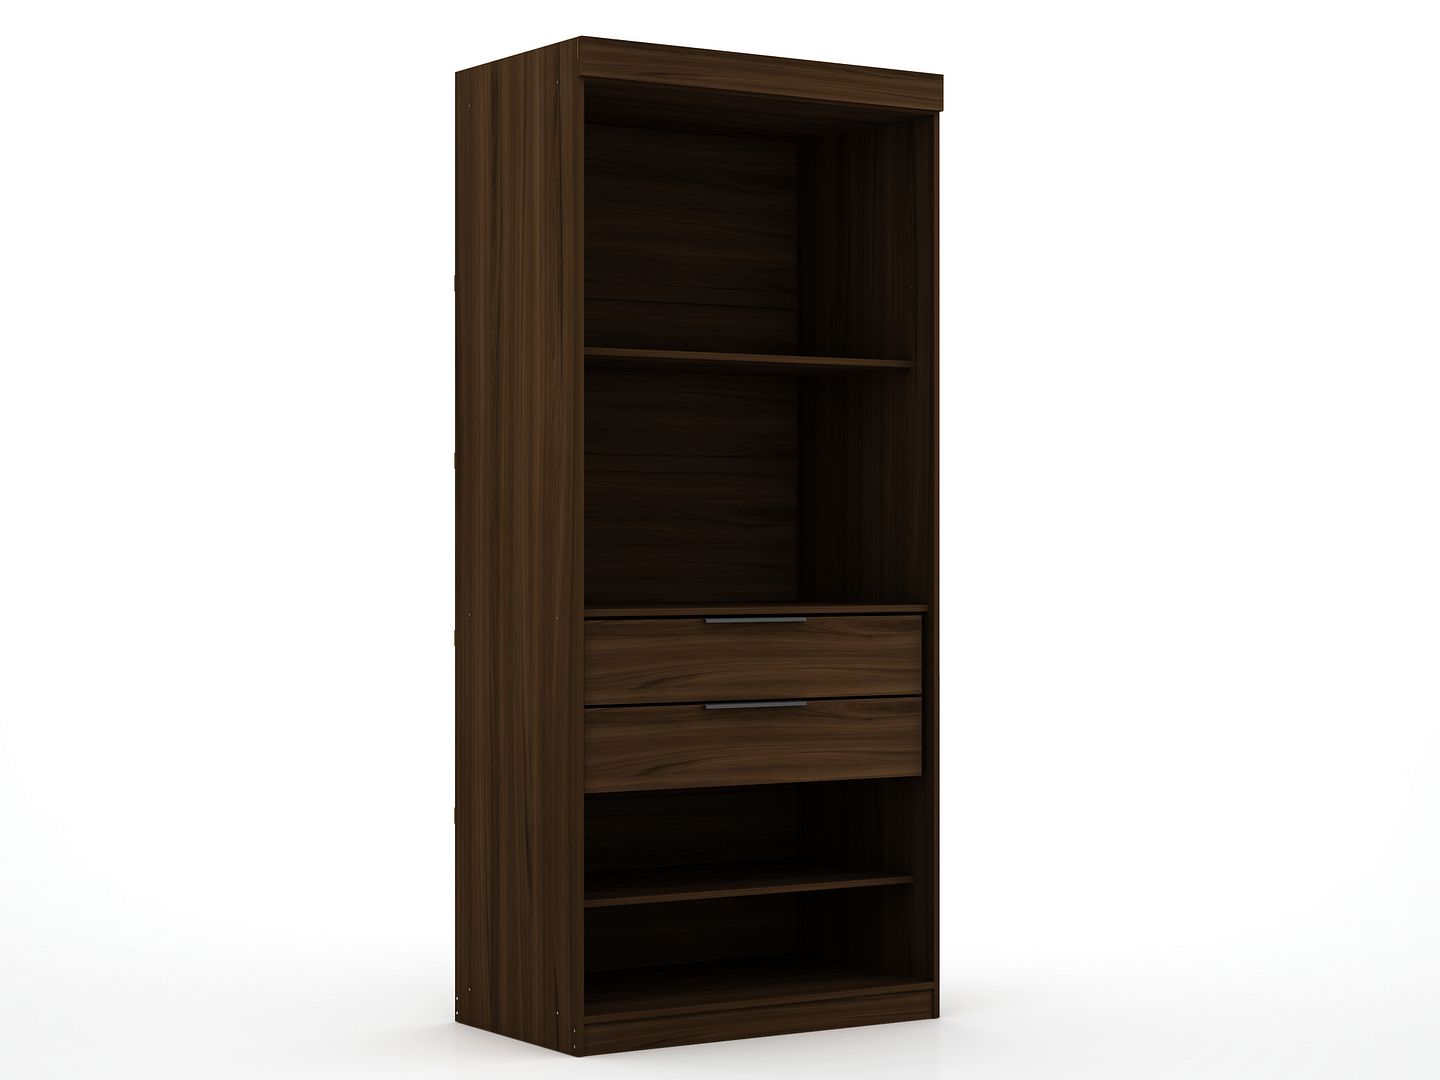 Mulberry 2.0 Sectional Wardrobe Closet - East Shore Modern Home Furnishings